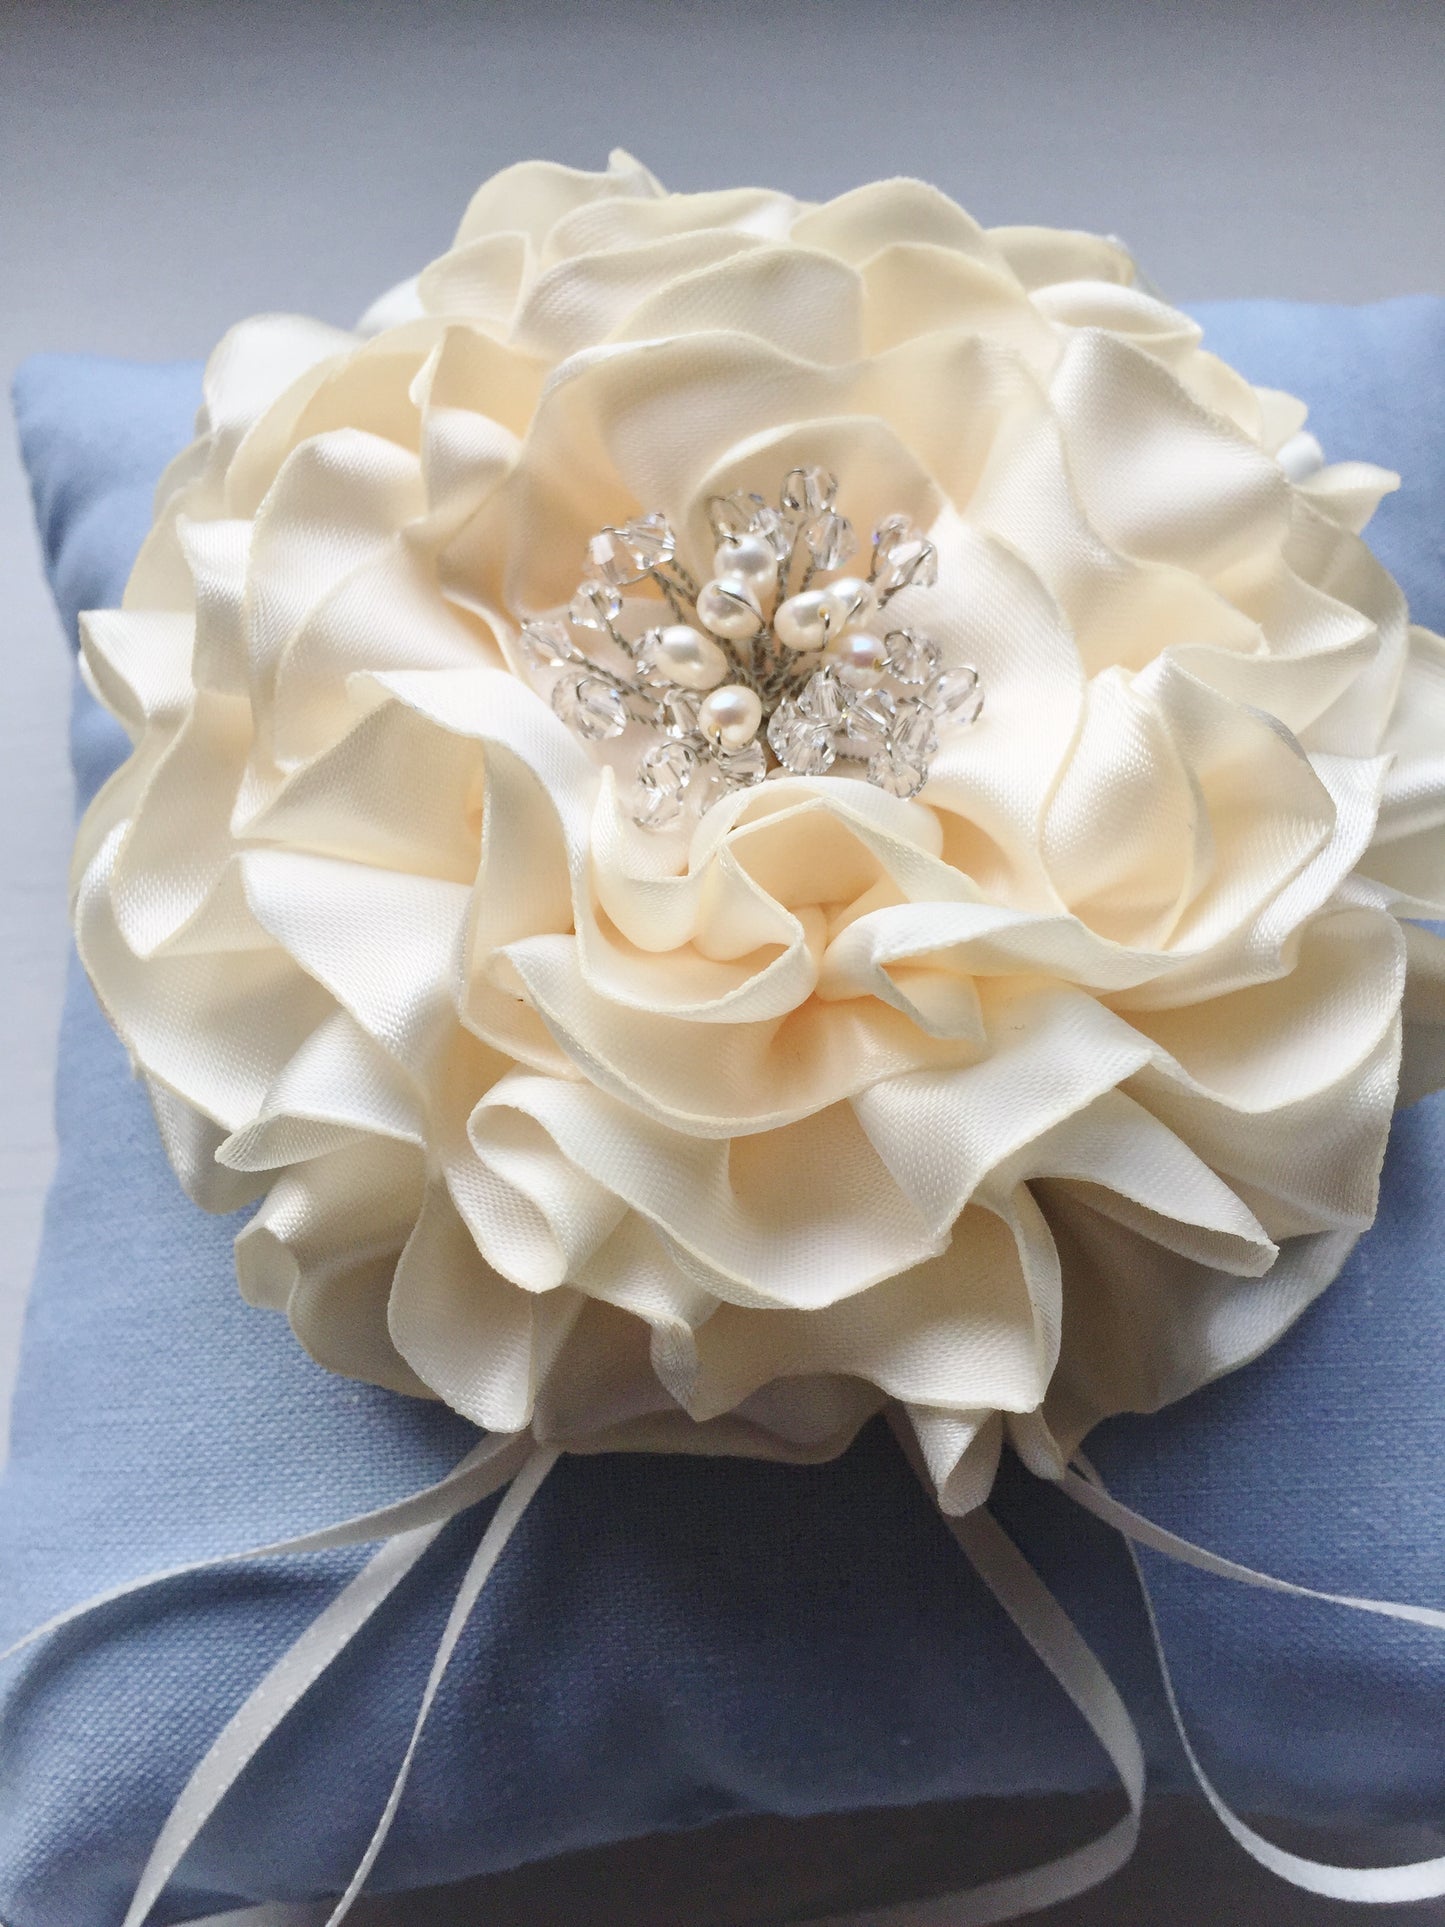 Signature Peony Ring Pillow in Vintage Sky Blue and Cream Peony